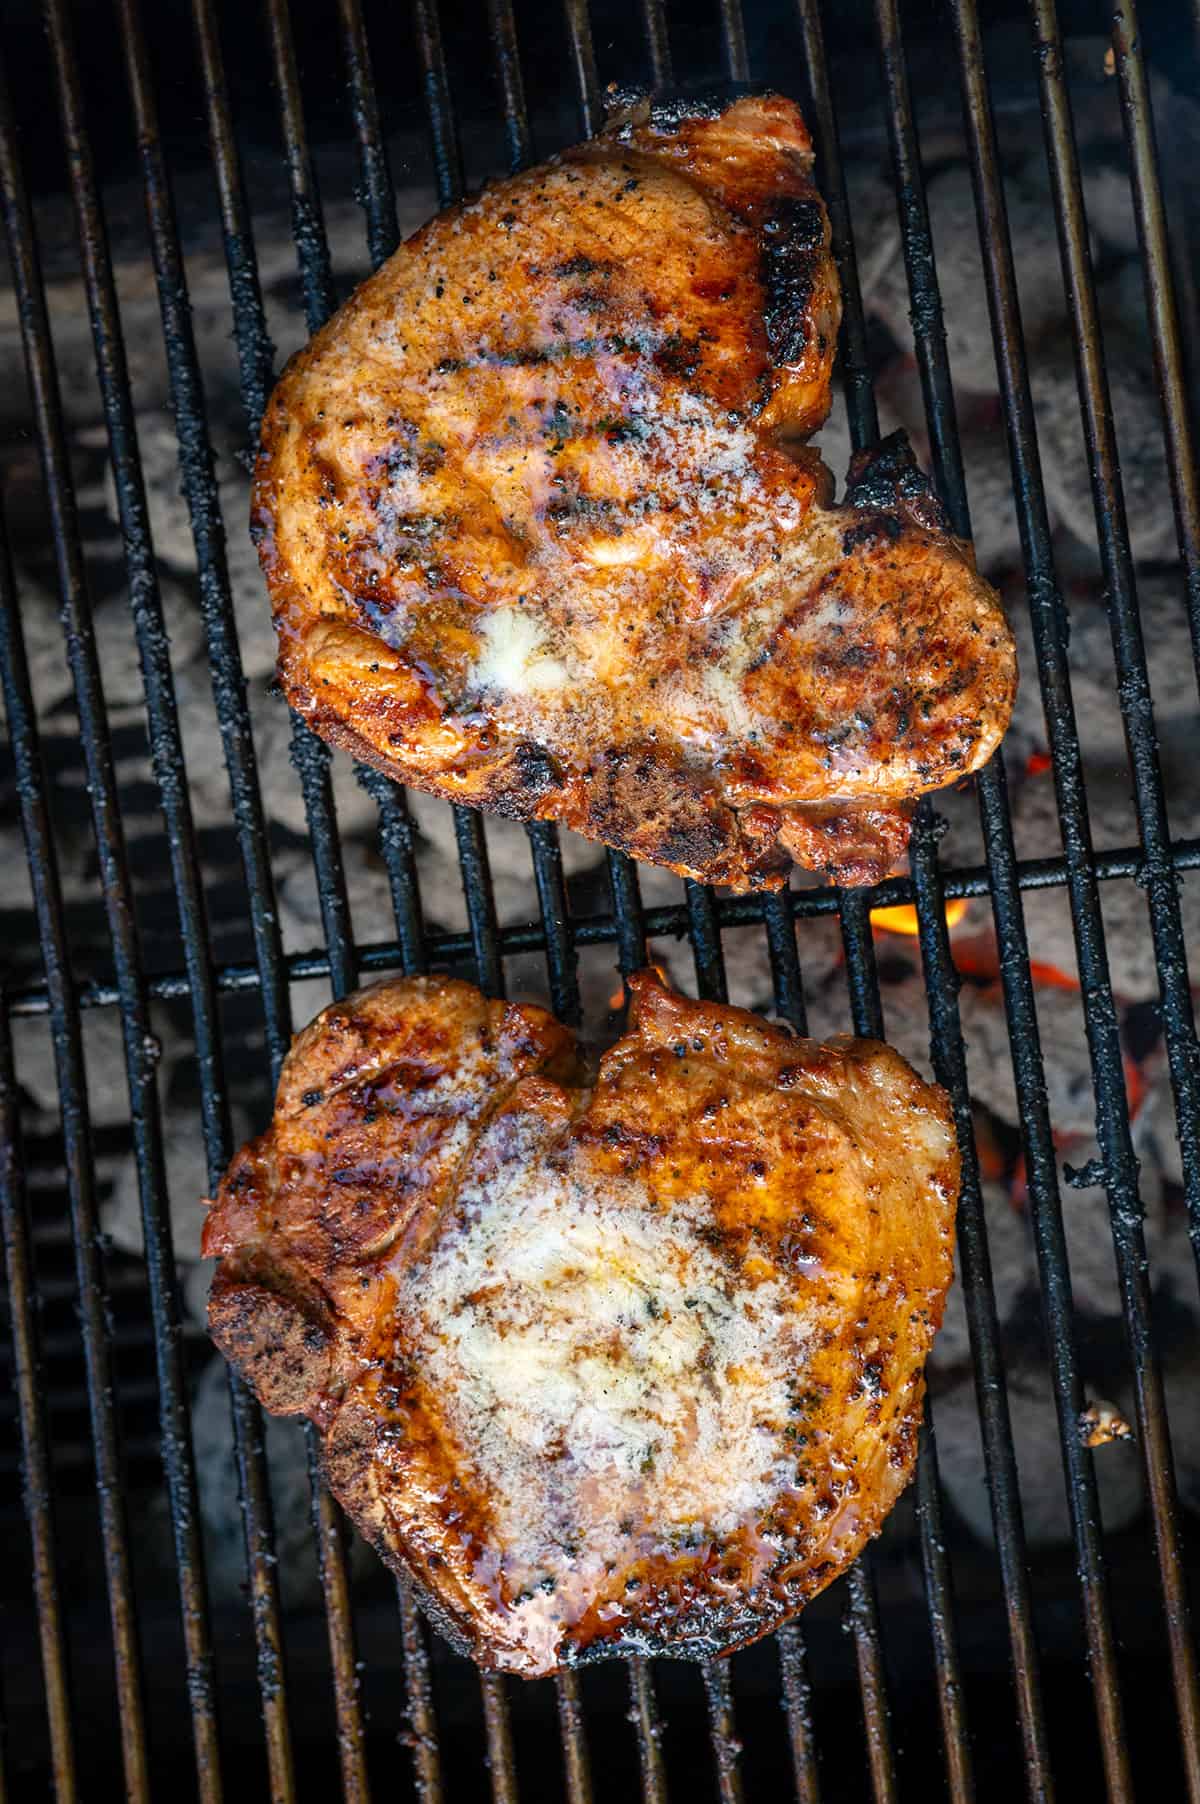 pork chops on grill with melted butter.